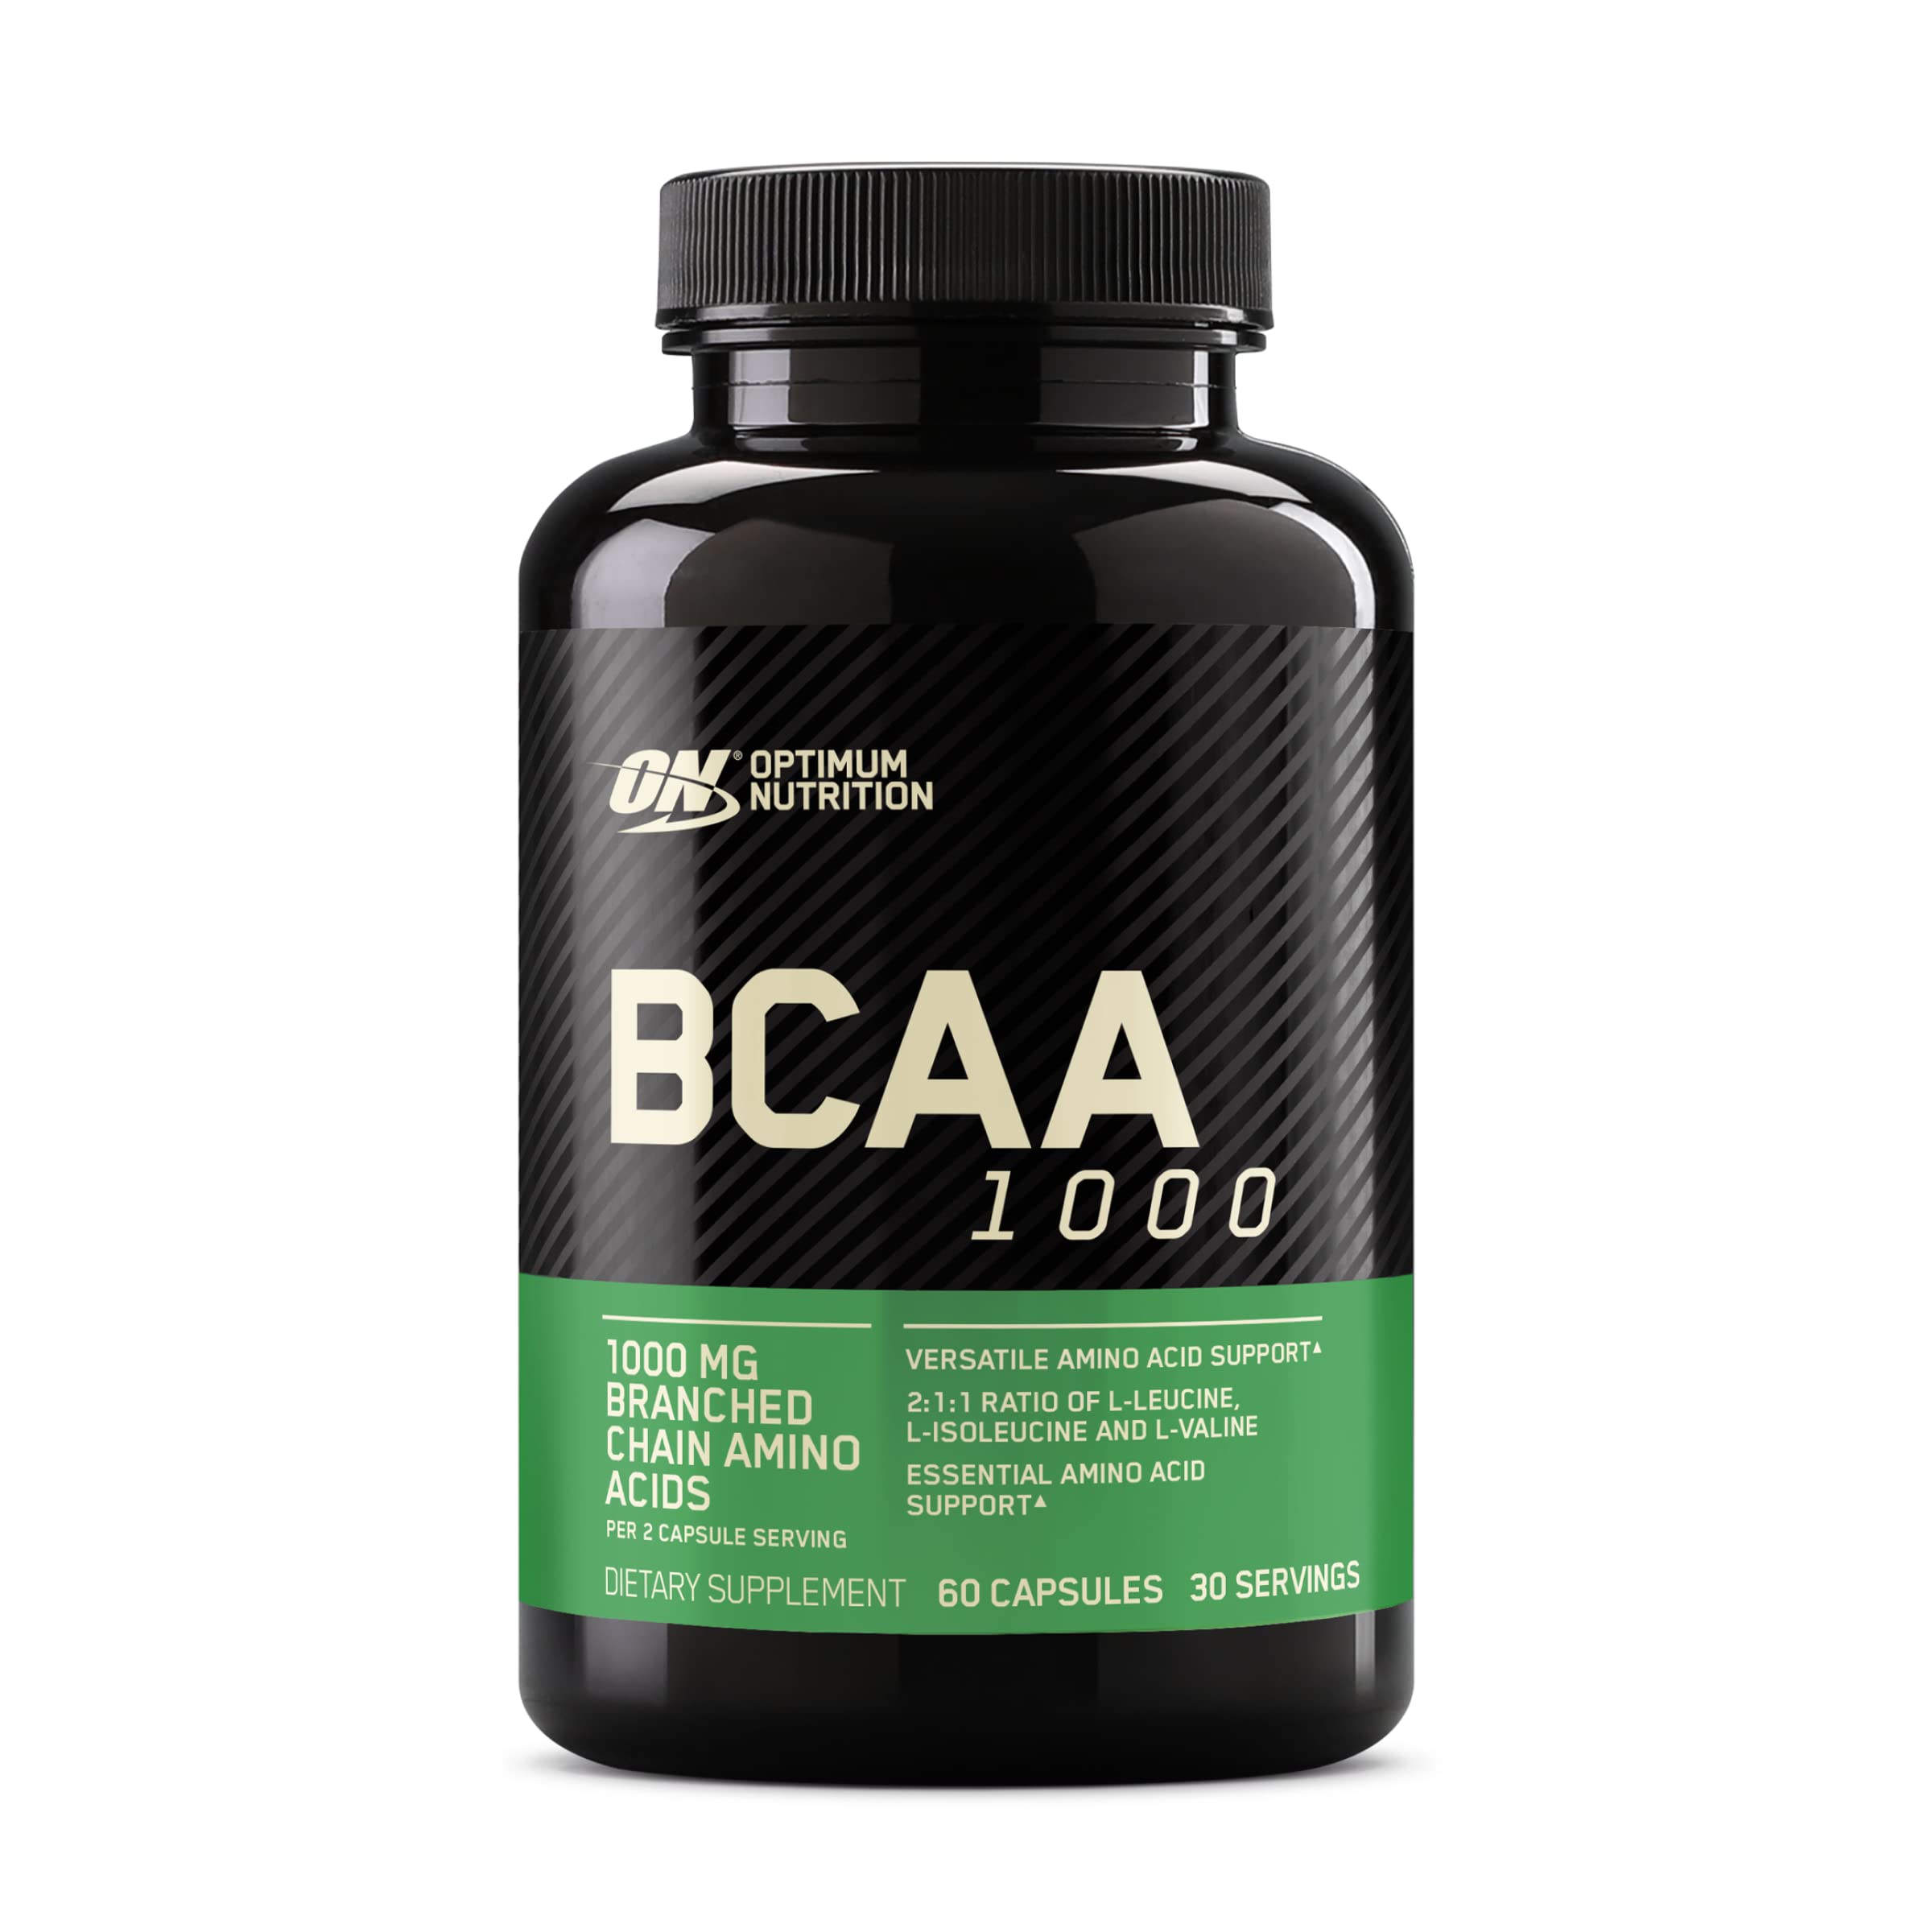 60-Capsules Optimum Nutrition BCAA 1000mg Branched Chain Amino Acids Supplement  $6.50 w/ S&S + Free Shipping w/ Prime or on $35+